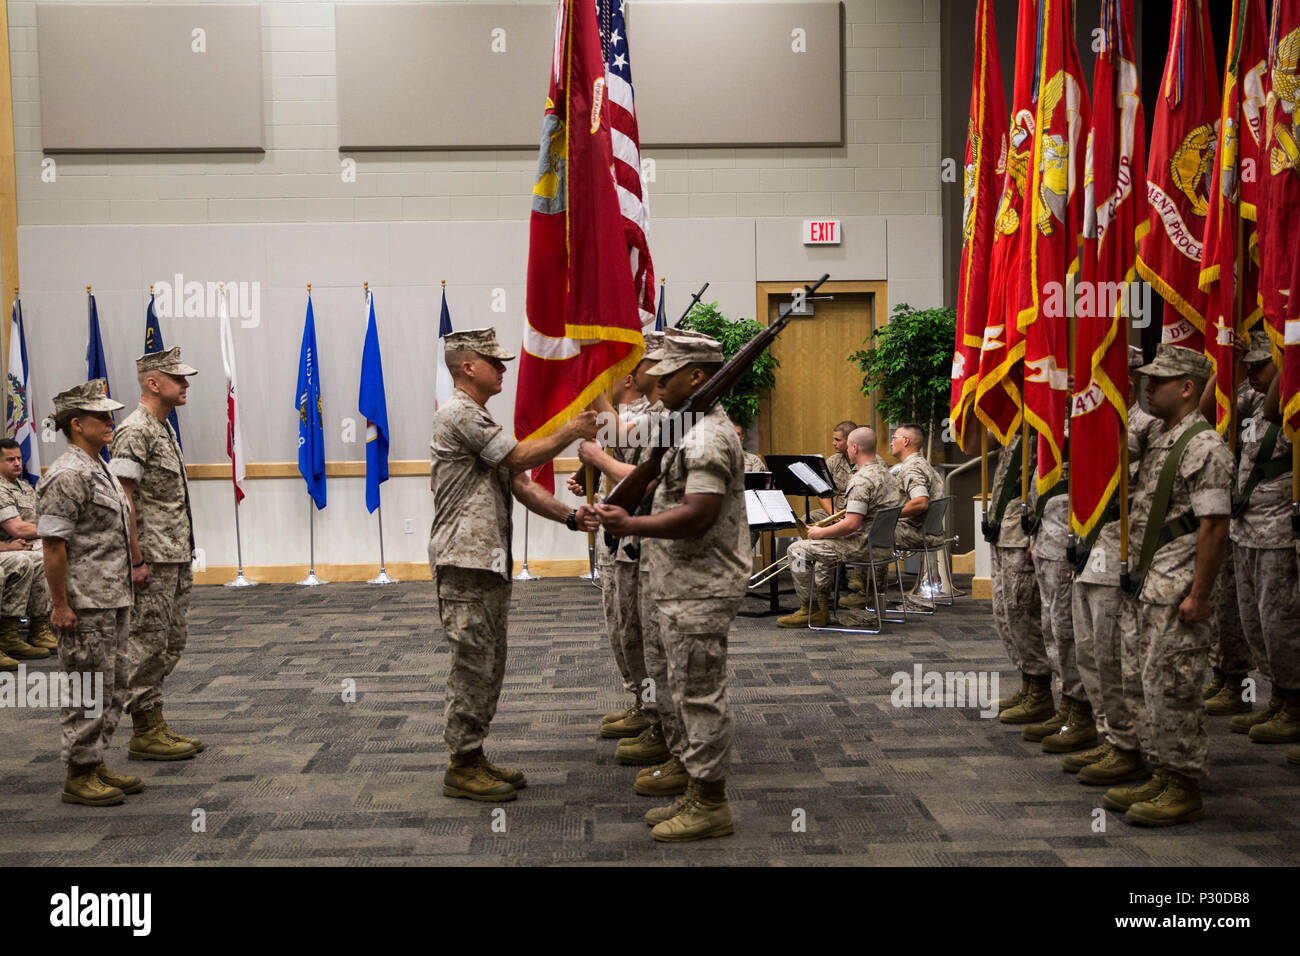 Sgt. Maj. William J. Grigsby (center), Sergeant Major of Force Headquarters Group, Marine Forces Reserve, takes the colors from the FHG color guard during the change of command ceremony at the Federal City Auditorium, New Orleans, Aug. 13, 2016. The passing of the colors symbolizes the transition from one commander to the other. (U.S. Marine Corps photo by Lance Cpl. Melissa Martens/ Released) Stock Photo